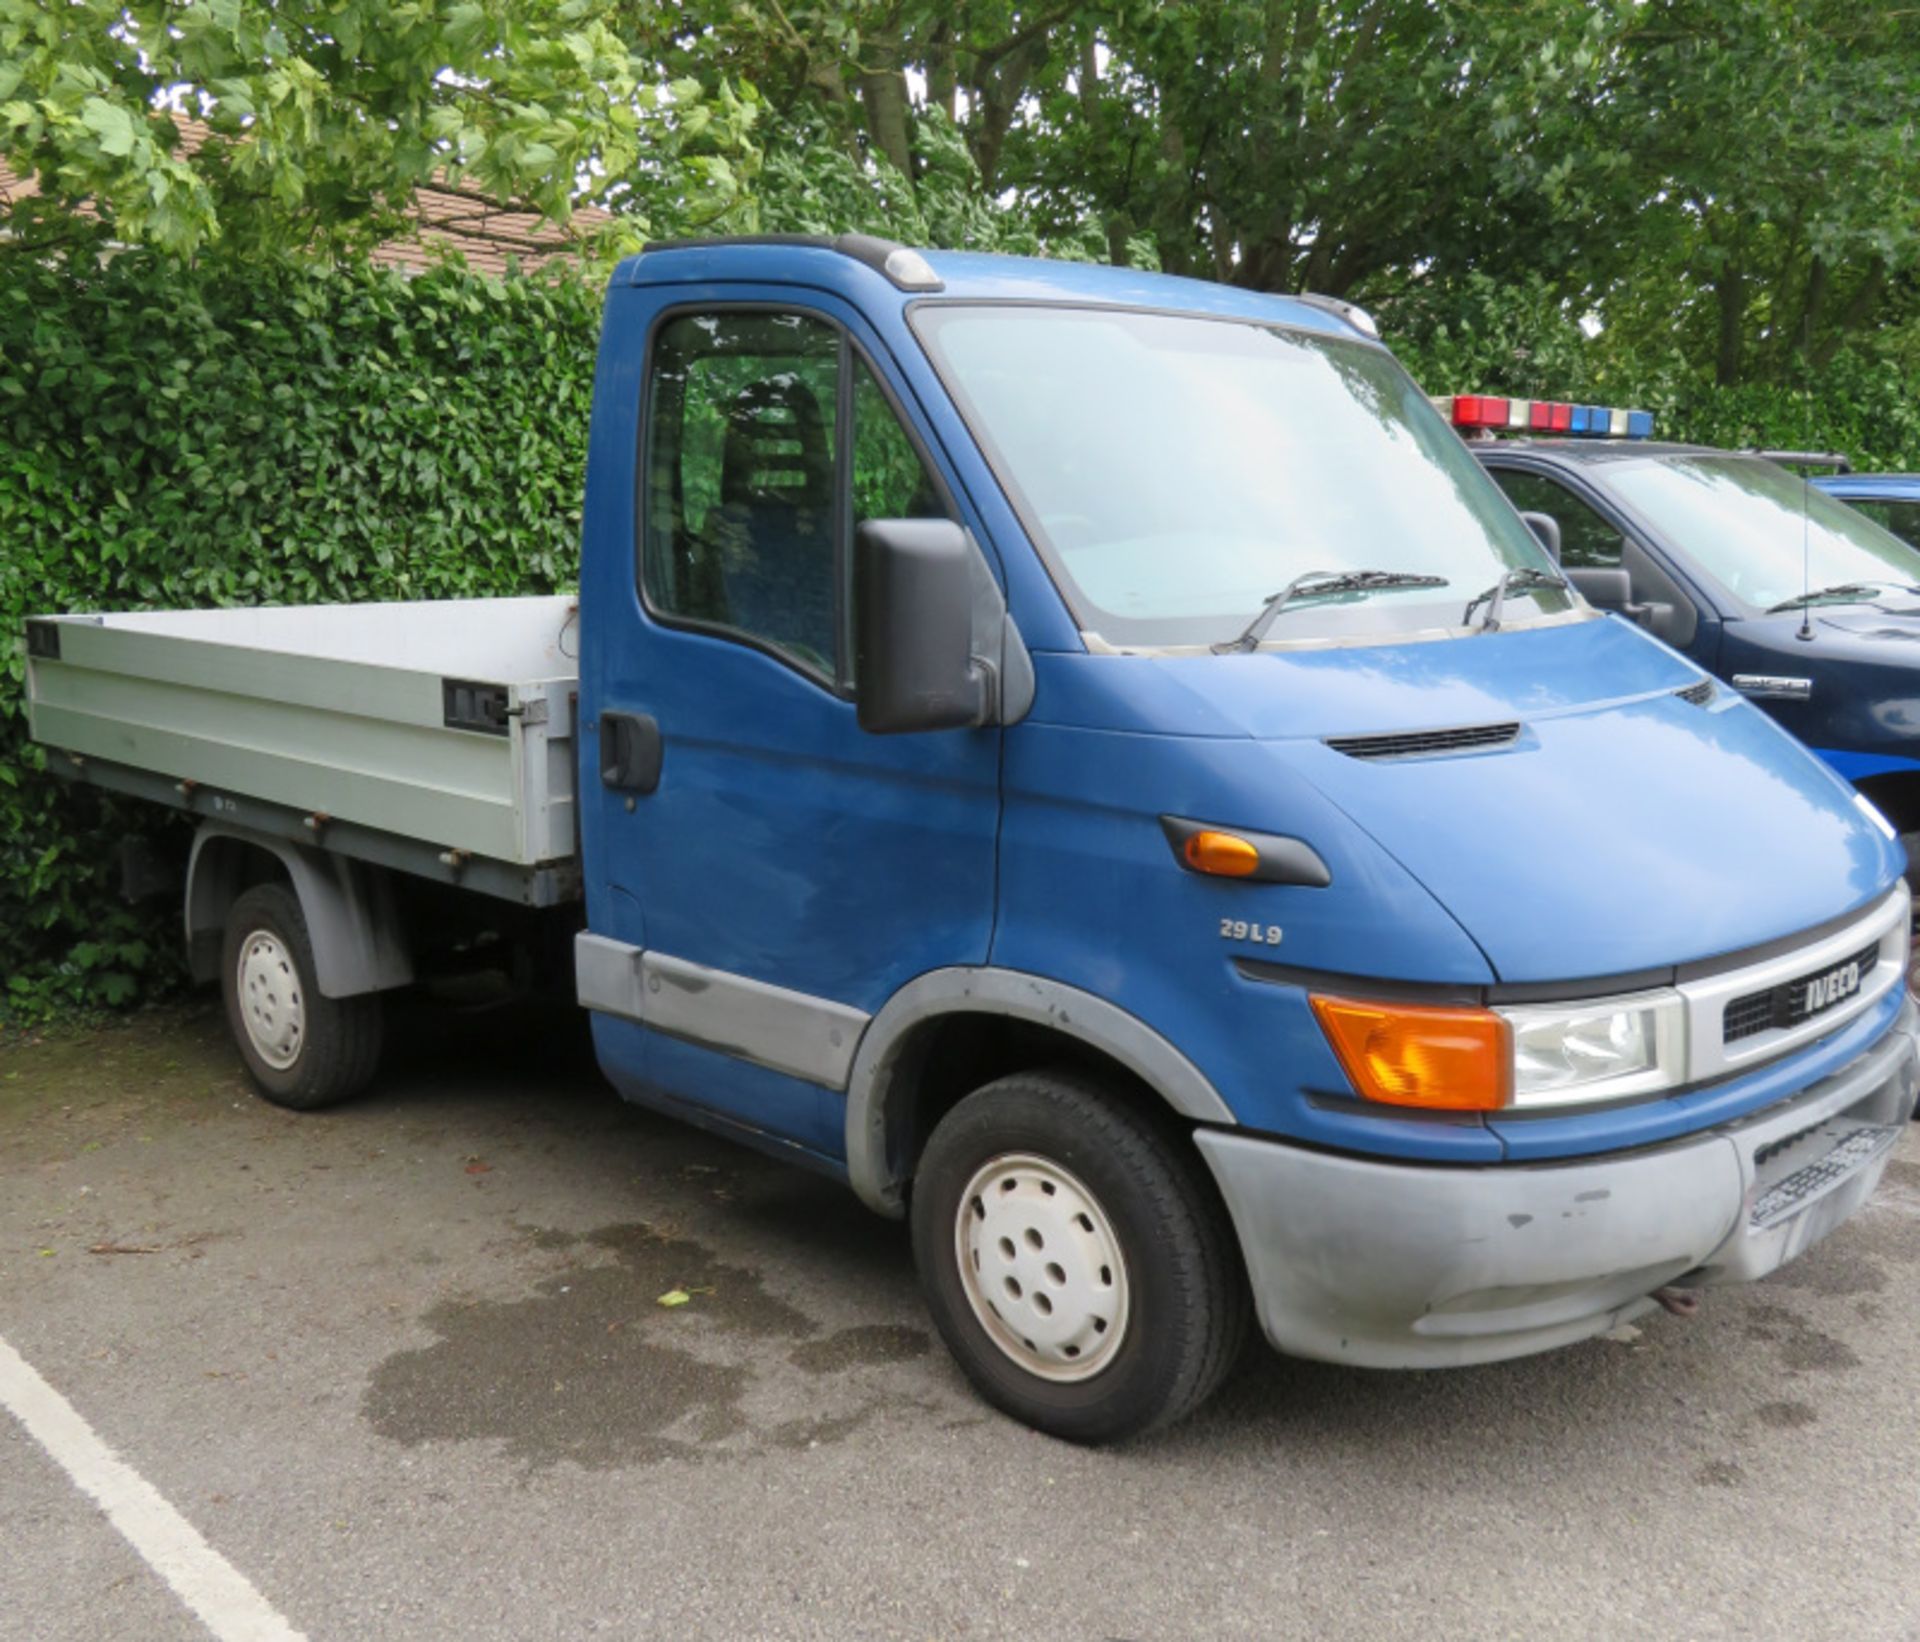 Iveco Daily drop side truck- 29L9 - diesel - year 2004 - 4 cylinder engine